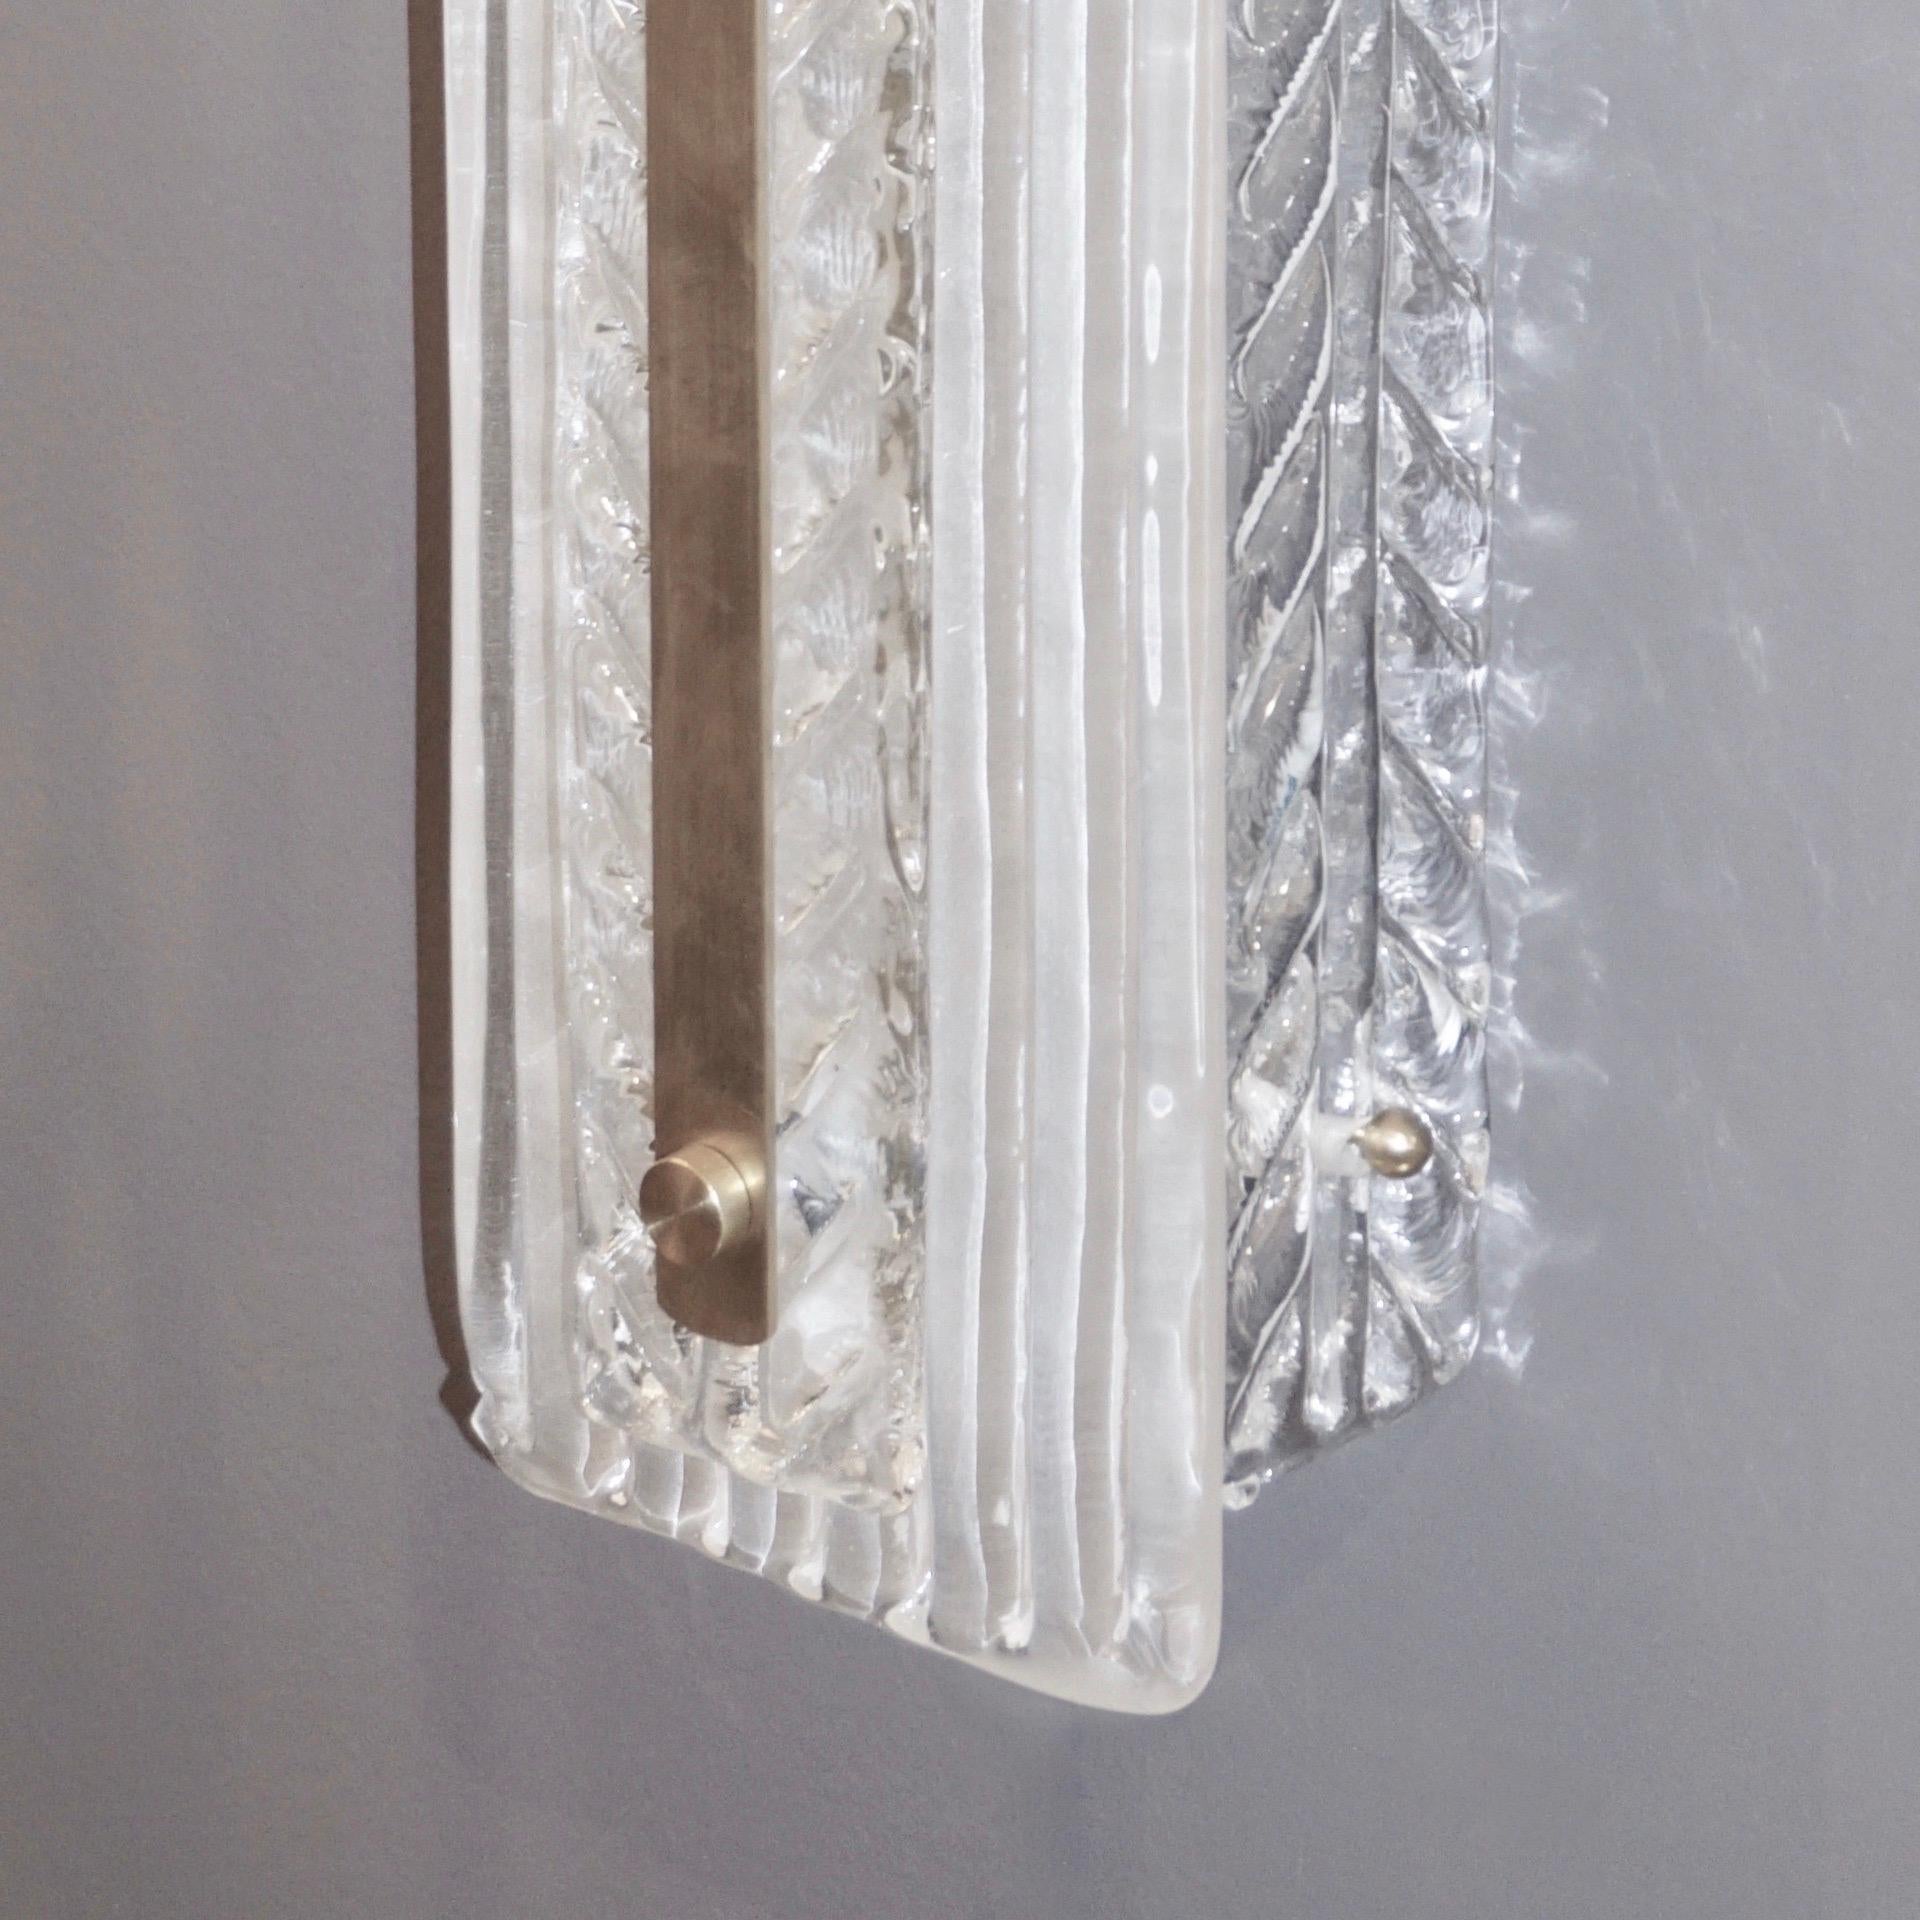 Contemporary Italian Modern Pair Tall White Crystal Leaf Textured Murano Glass Nickel Sconces